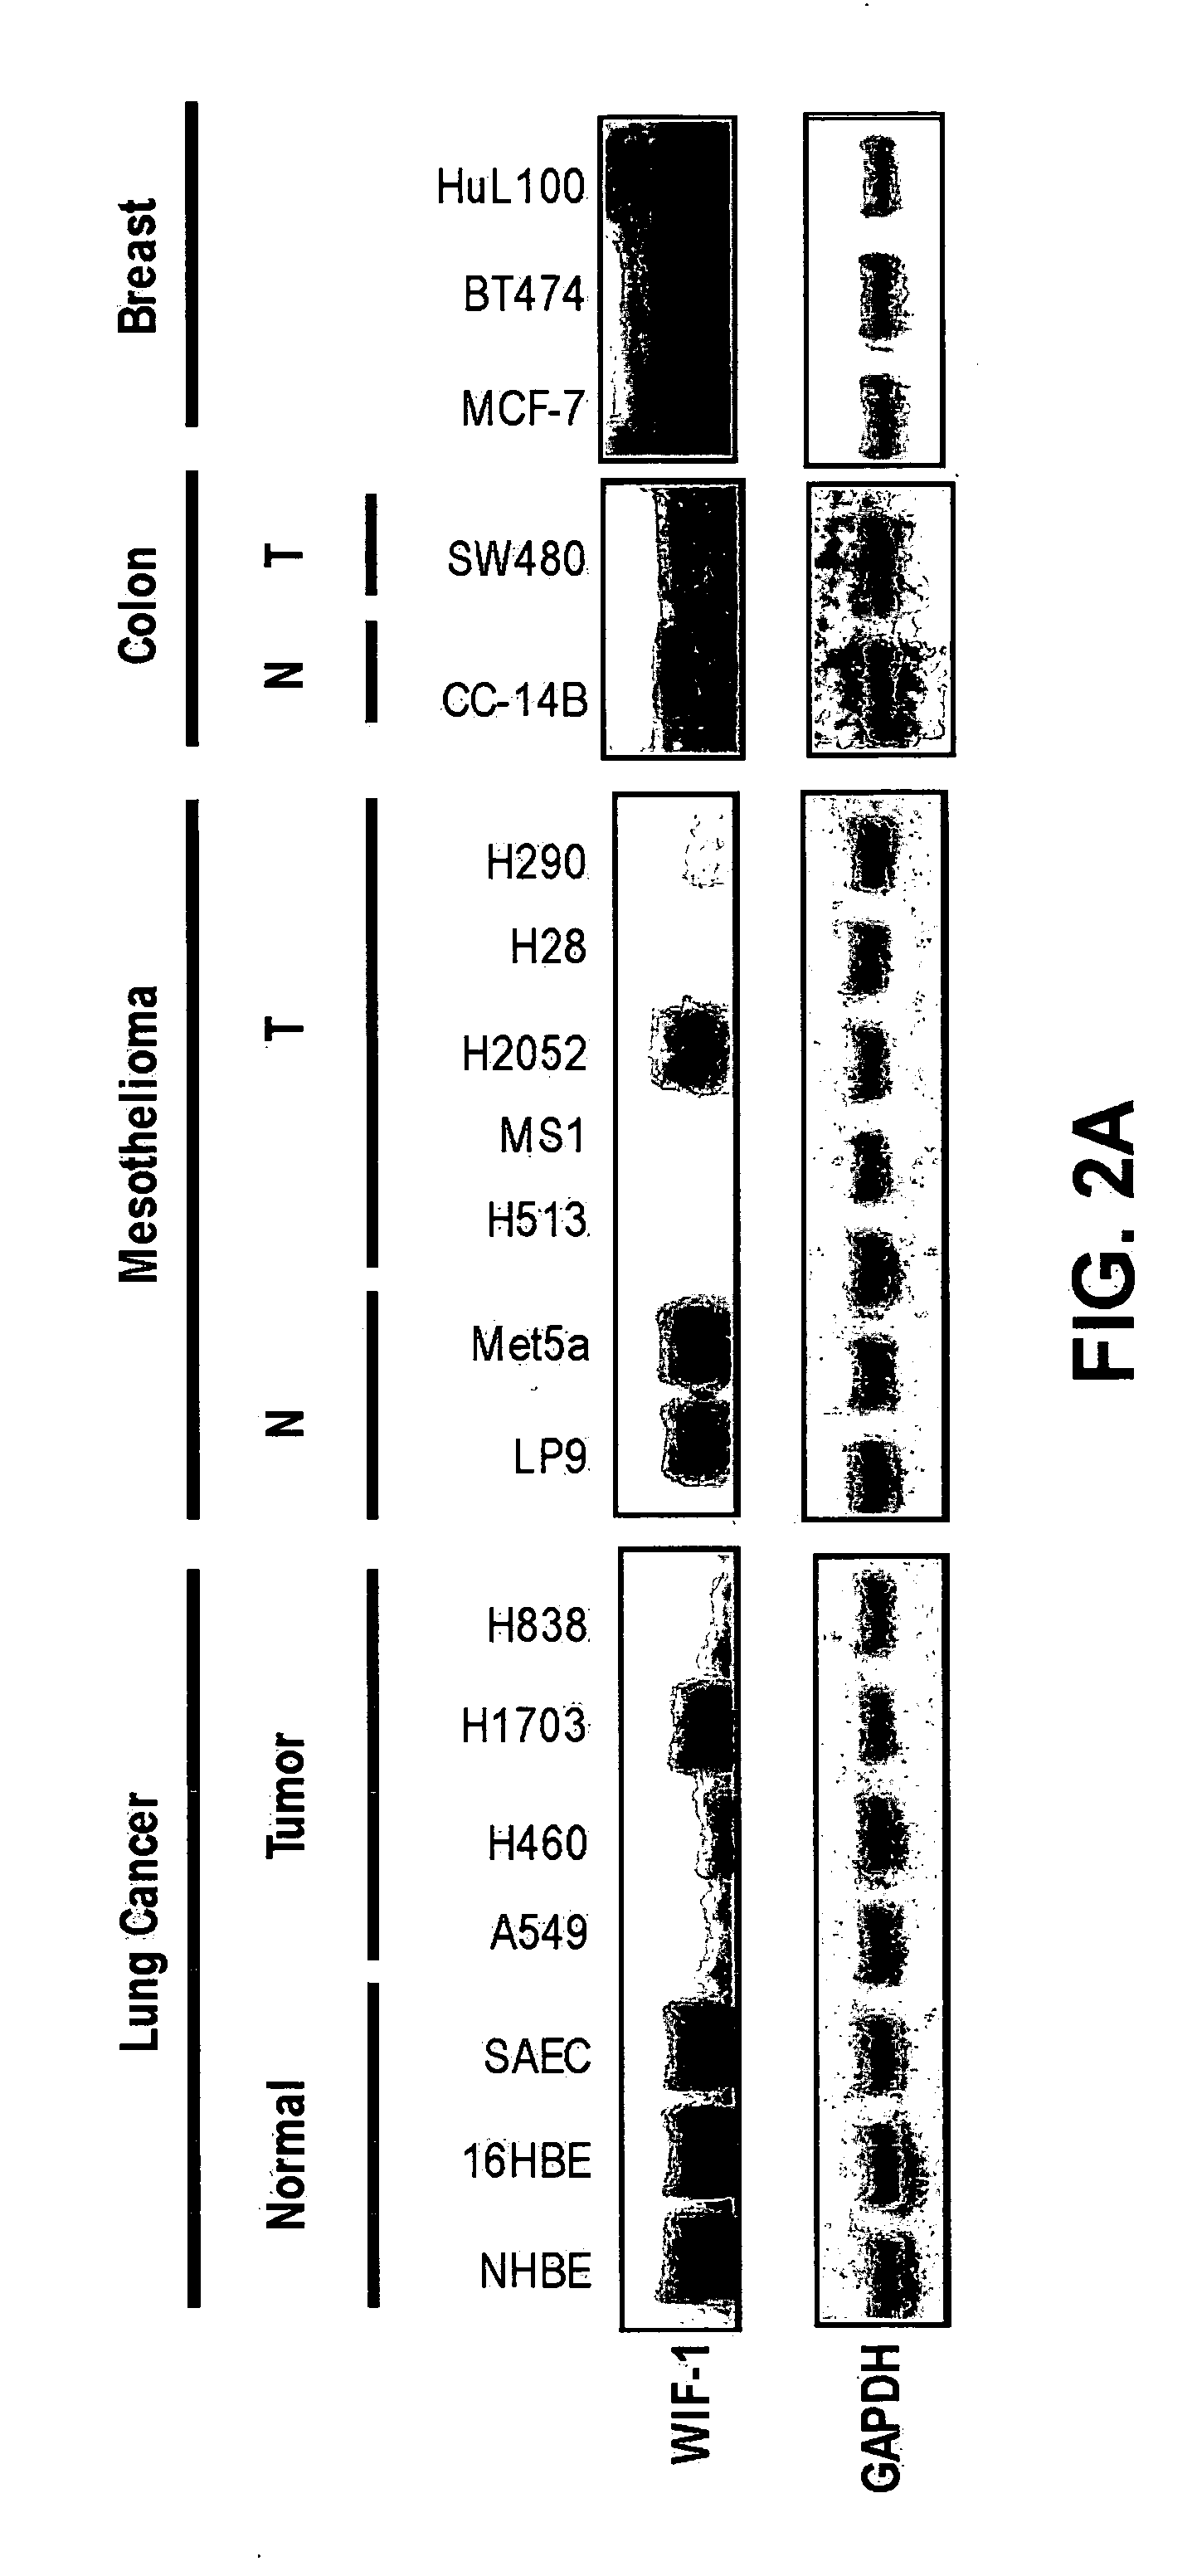 Methods for treating and diagnosing cancer with WNT inhibitory Factor-1 (WIF-1)